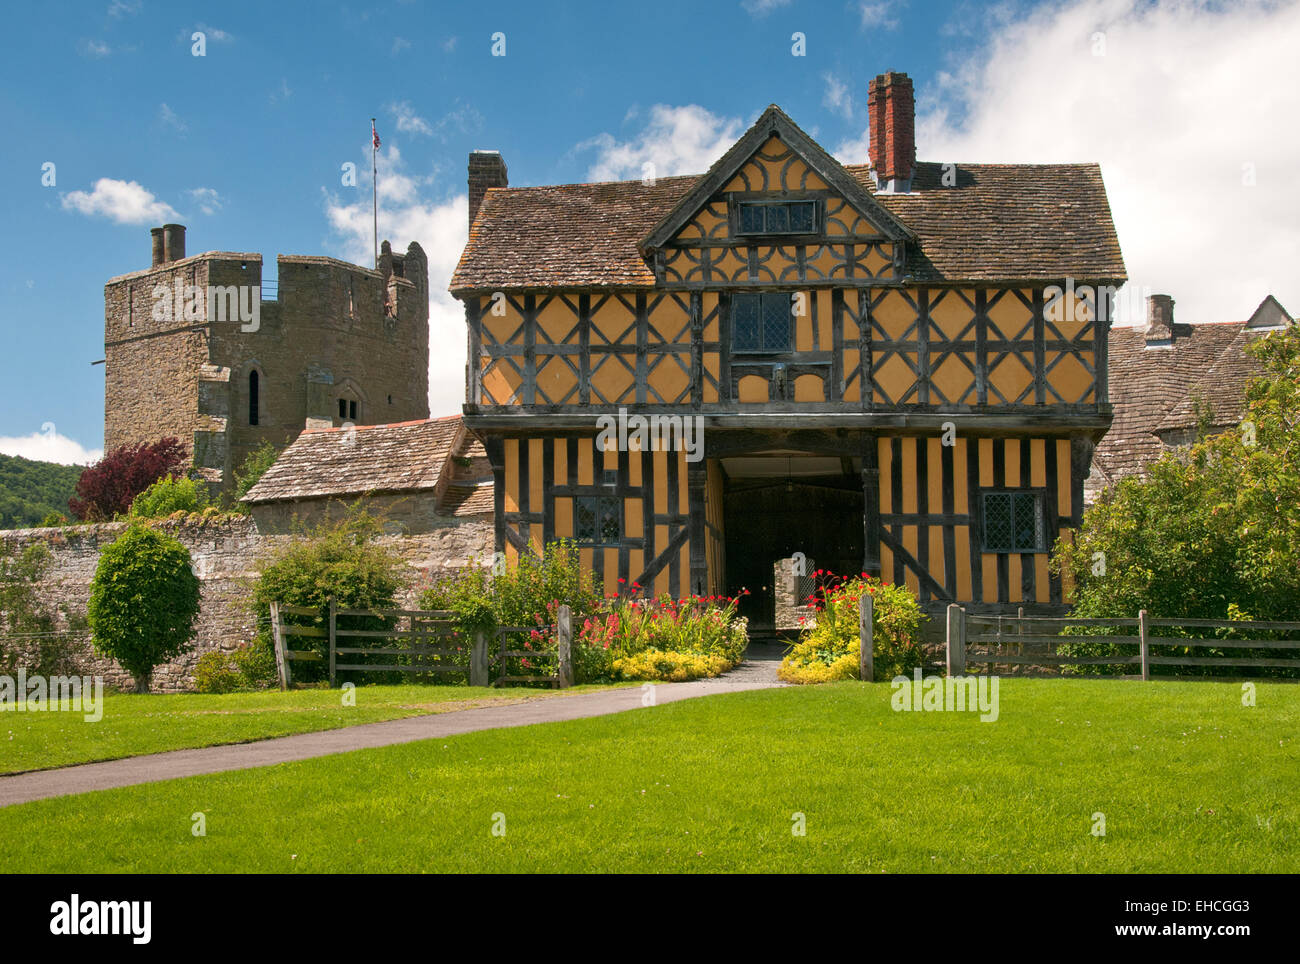 Stokesay Castle 13th Century Fortified Manor House, Craven Arms, Near Ludlow, Shropshire, England, UK Stock Photo